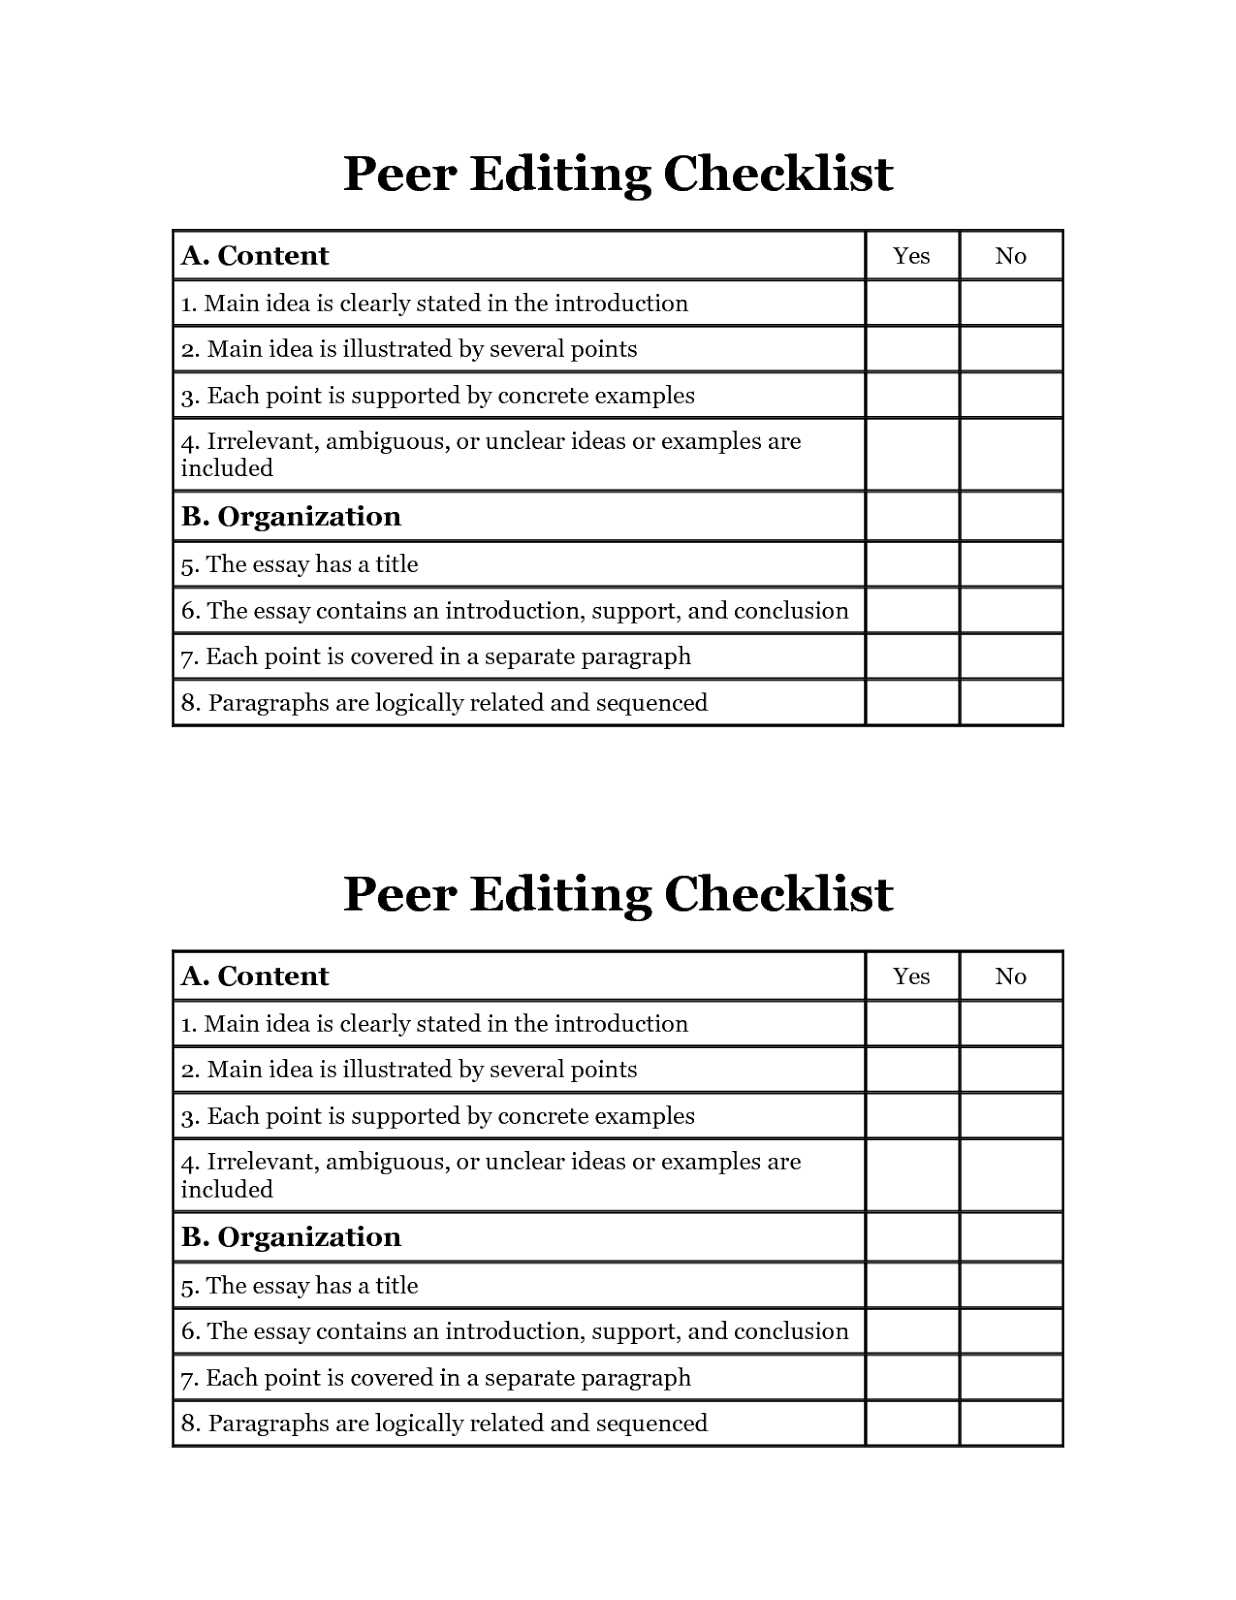 Personal Narrative Peer Review Worksheet Along with Law Essays Estoppel Essay How to Write Better Law Essays tools and